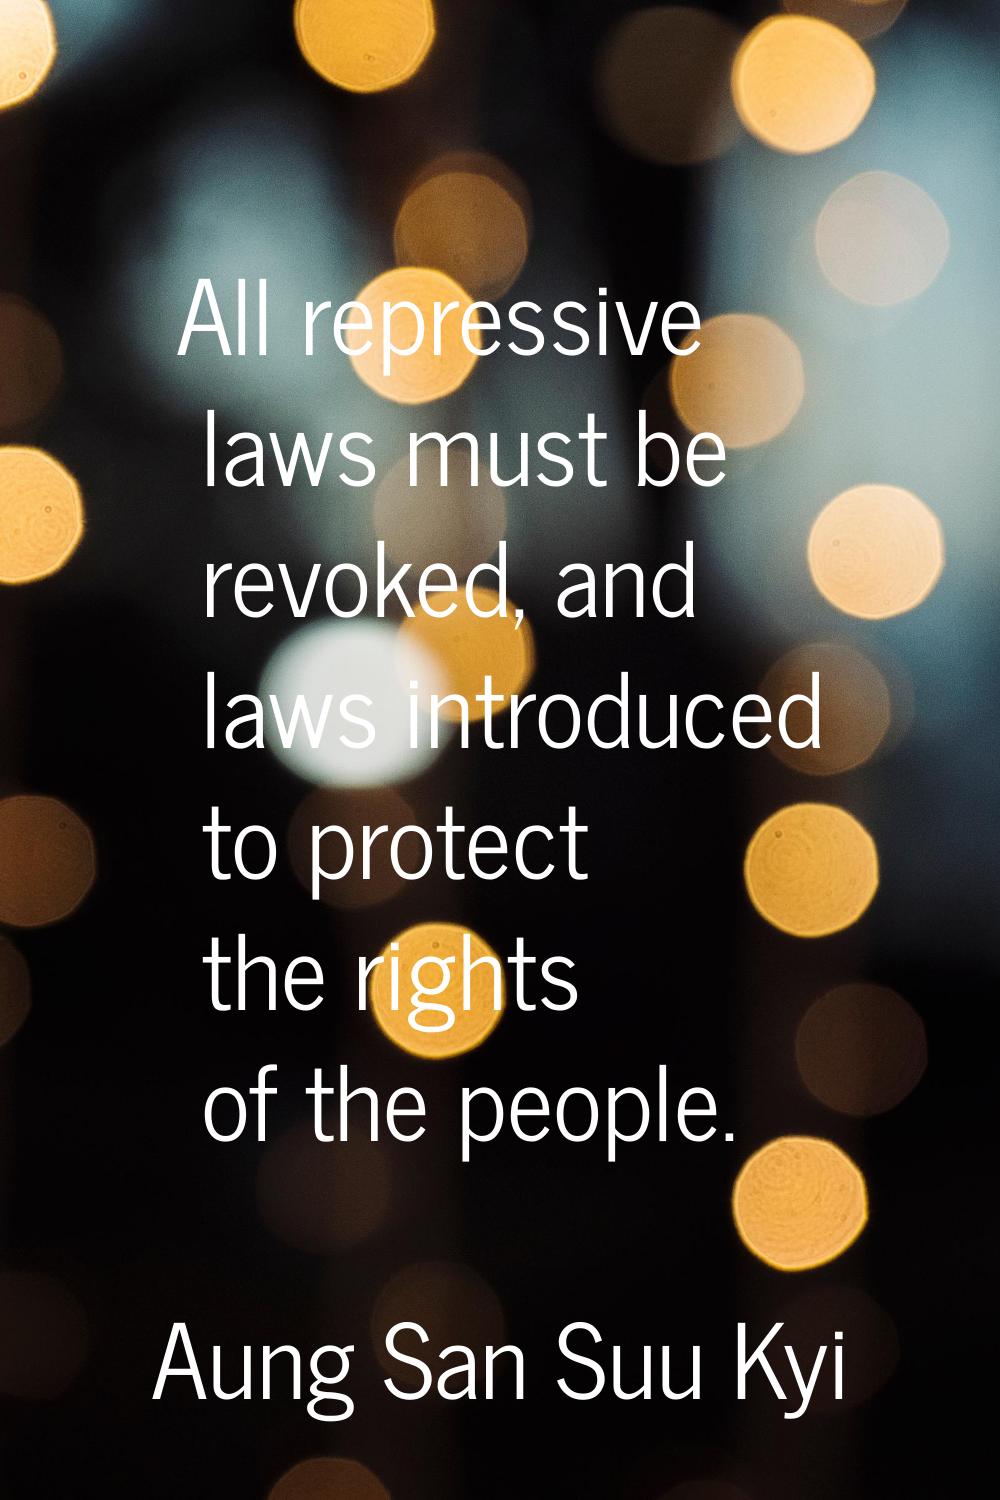 All repressive laws must be revoked, and laws introduced to protect the rights of the people.